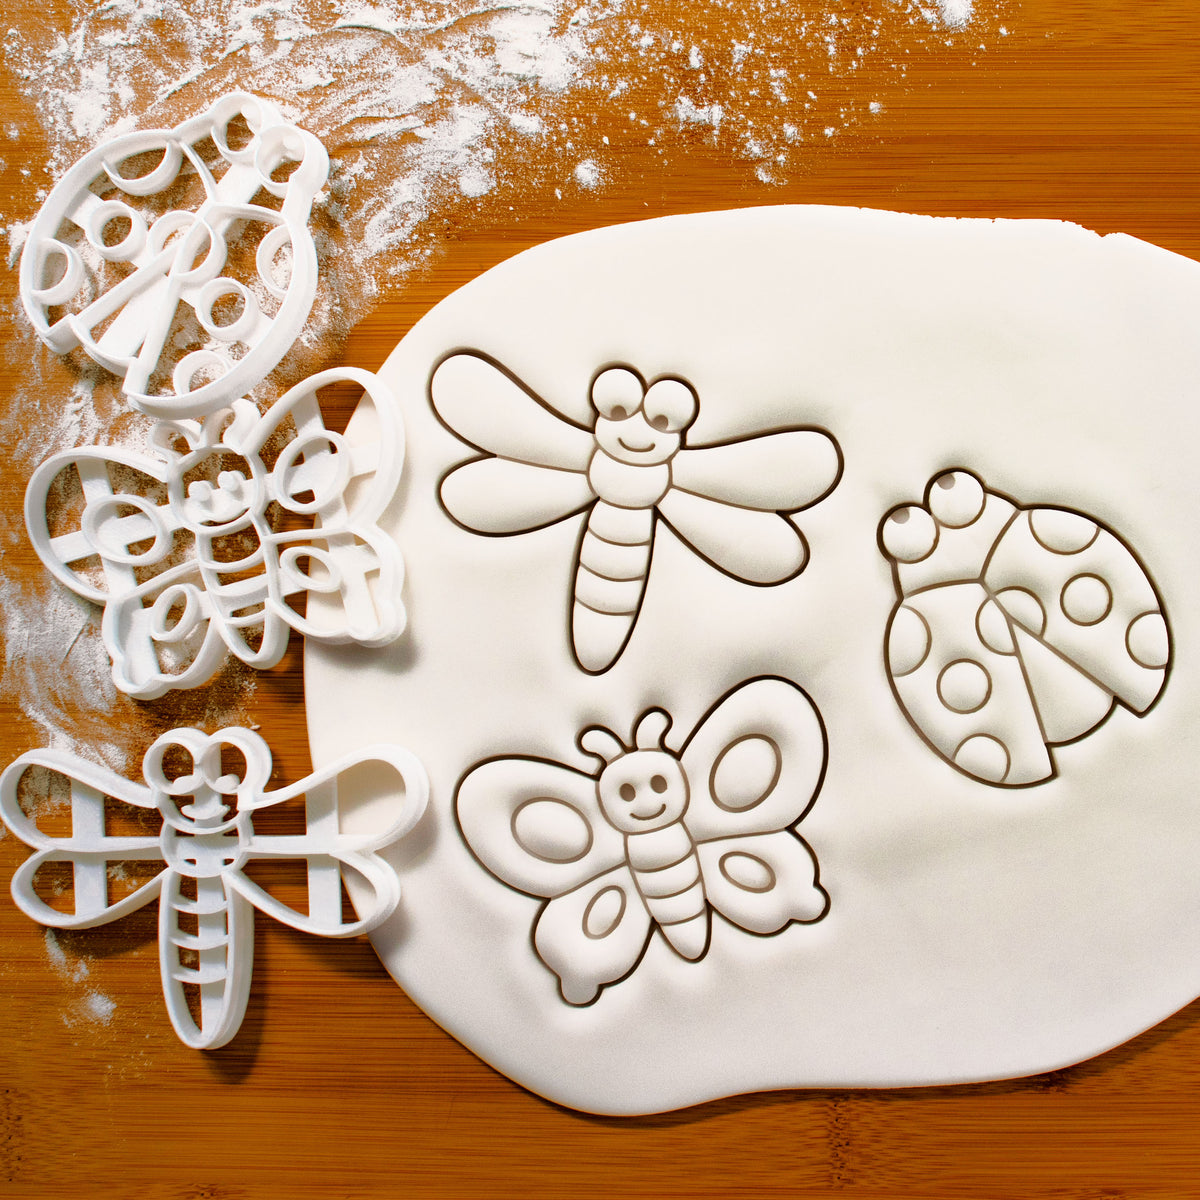 Insect Soap Dragonfly Butterfly Ladybug Shape DIY Baking Chocolate